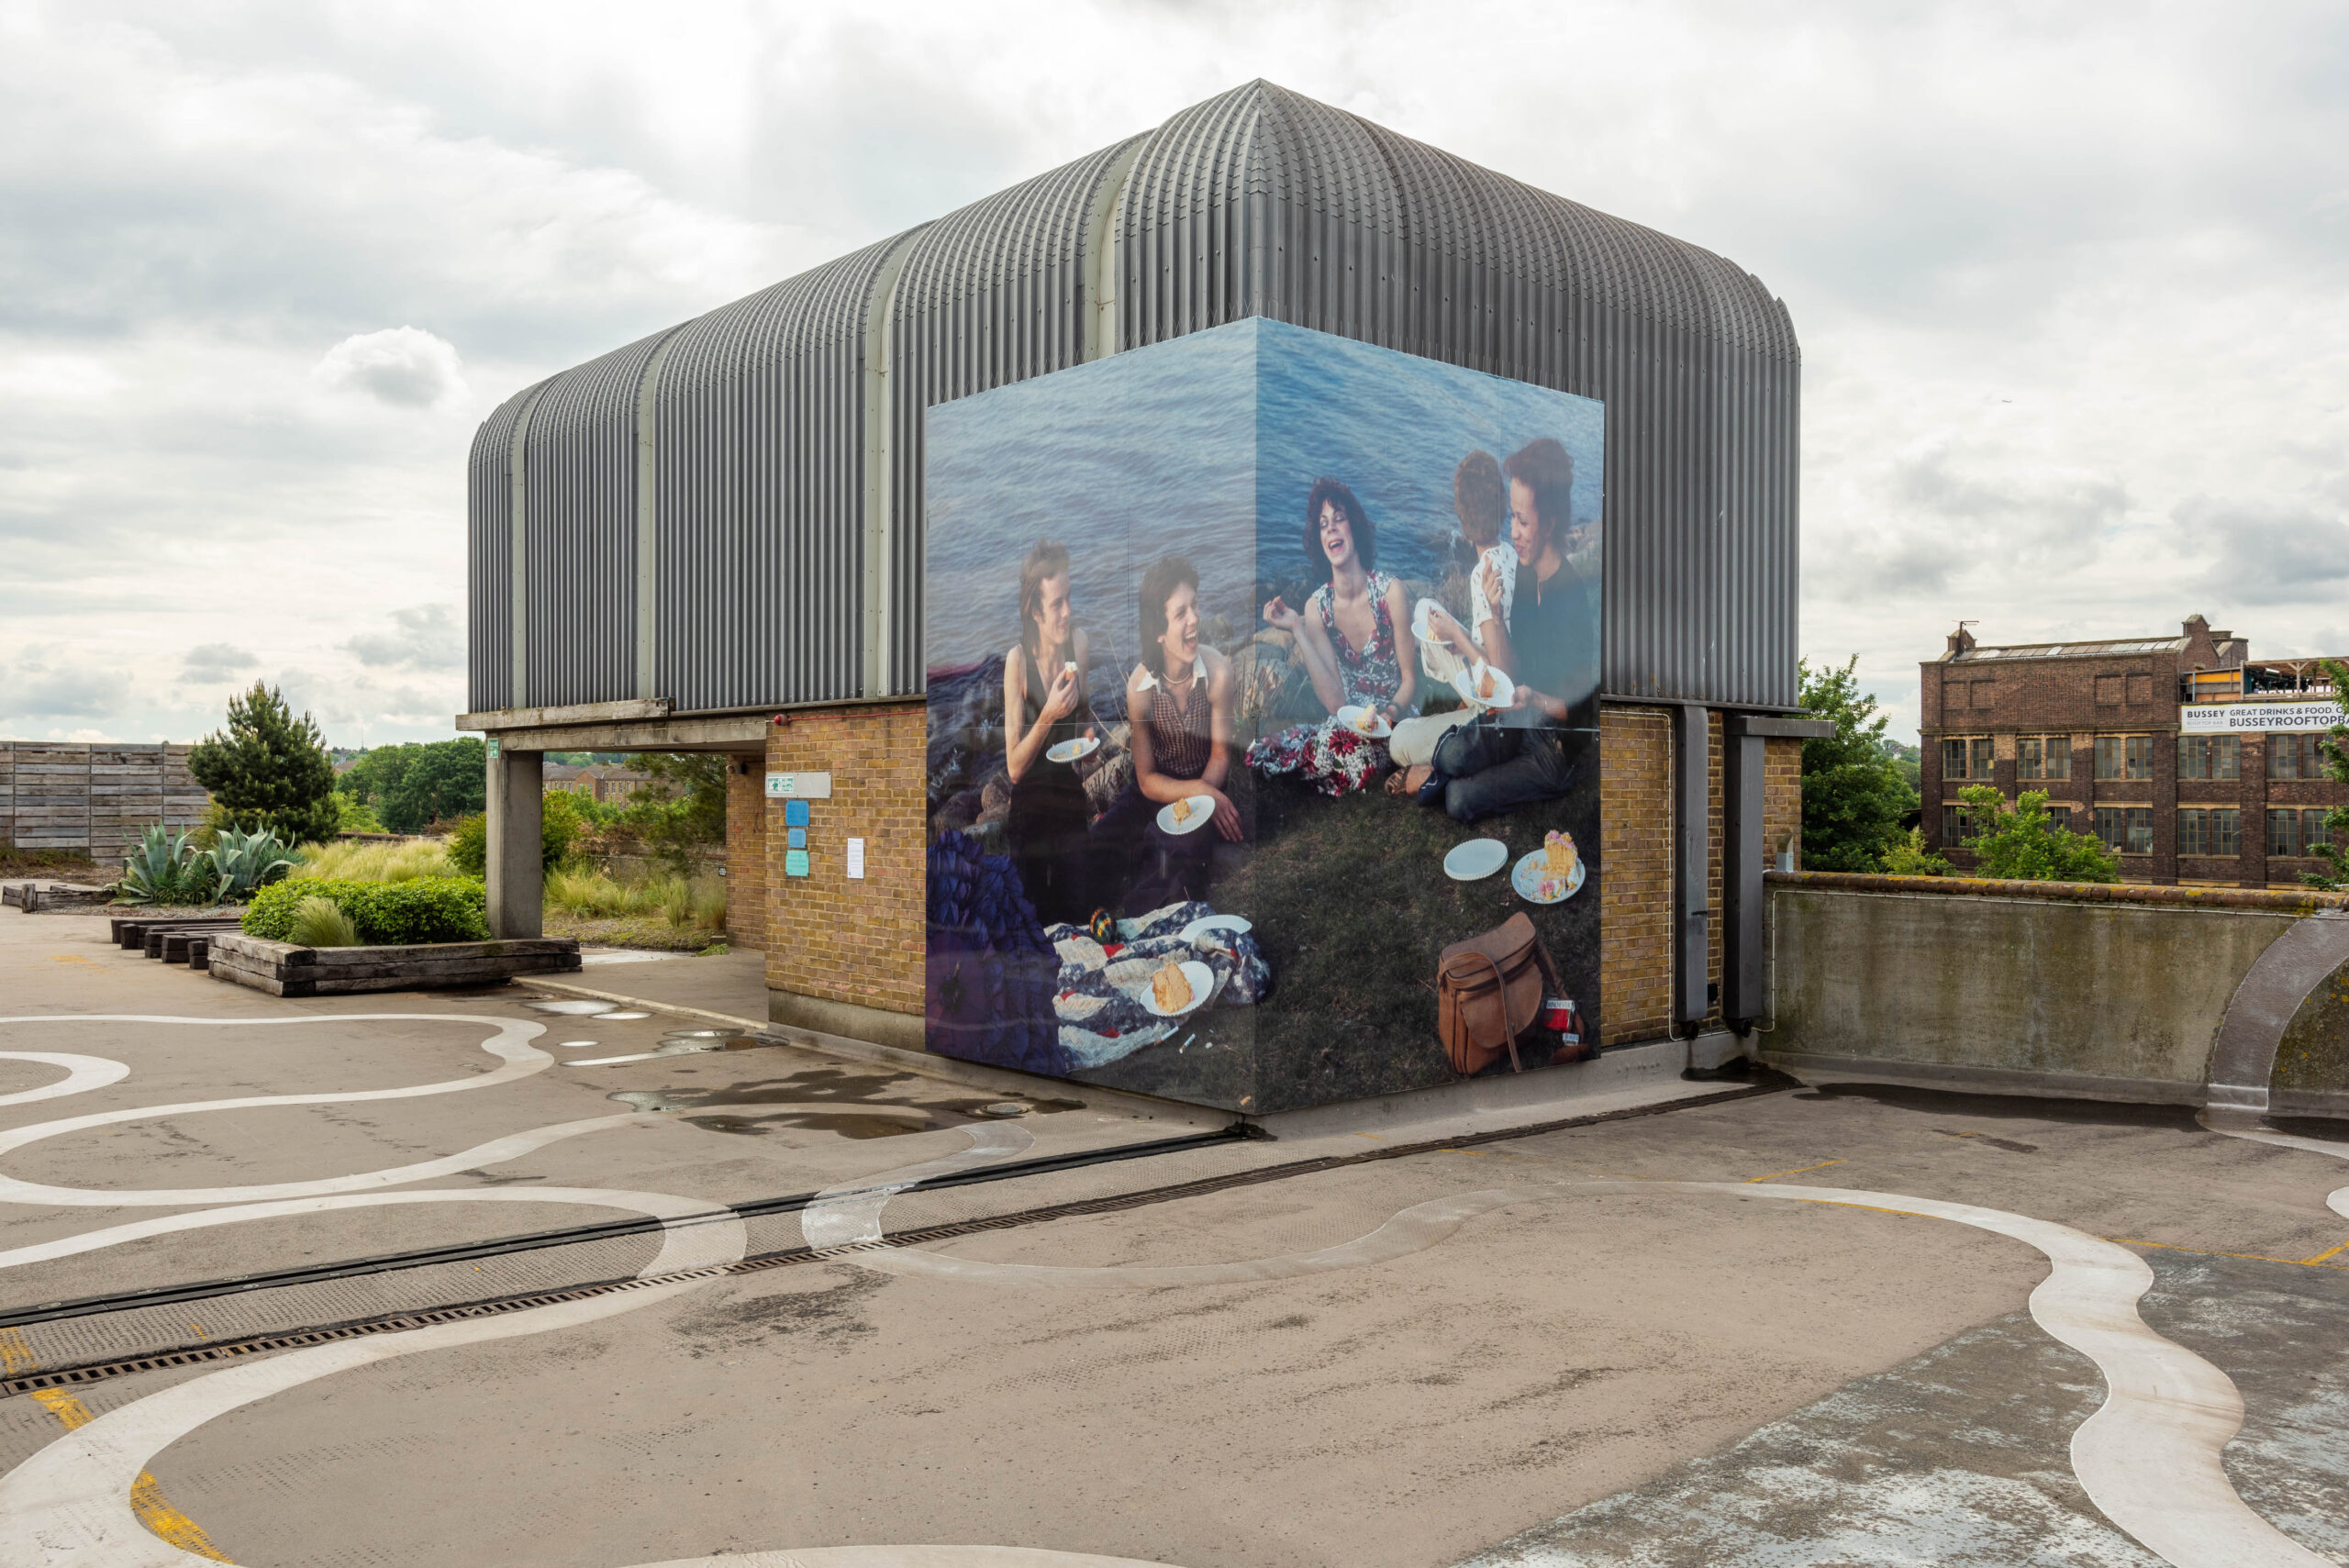 ID: a large billboard is attached to a rooftop lift shaft, measuring 4 metres tall by 6 metres wide. There is a right angle bend half way through the width of the image as it wraps around the lift shaft. The image shows four people sitting on the grassy bank of a clear river, dressed in jeans, t-shirts and flowery summer dresses. There is a parasol, bottle, cigarette packet and a camera case on the floor around them. They are all joyfully laughing as they eat slices of sponge cake from white paper plates.